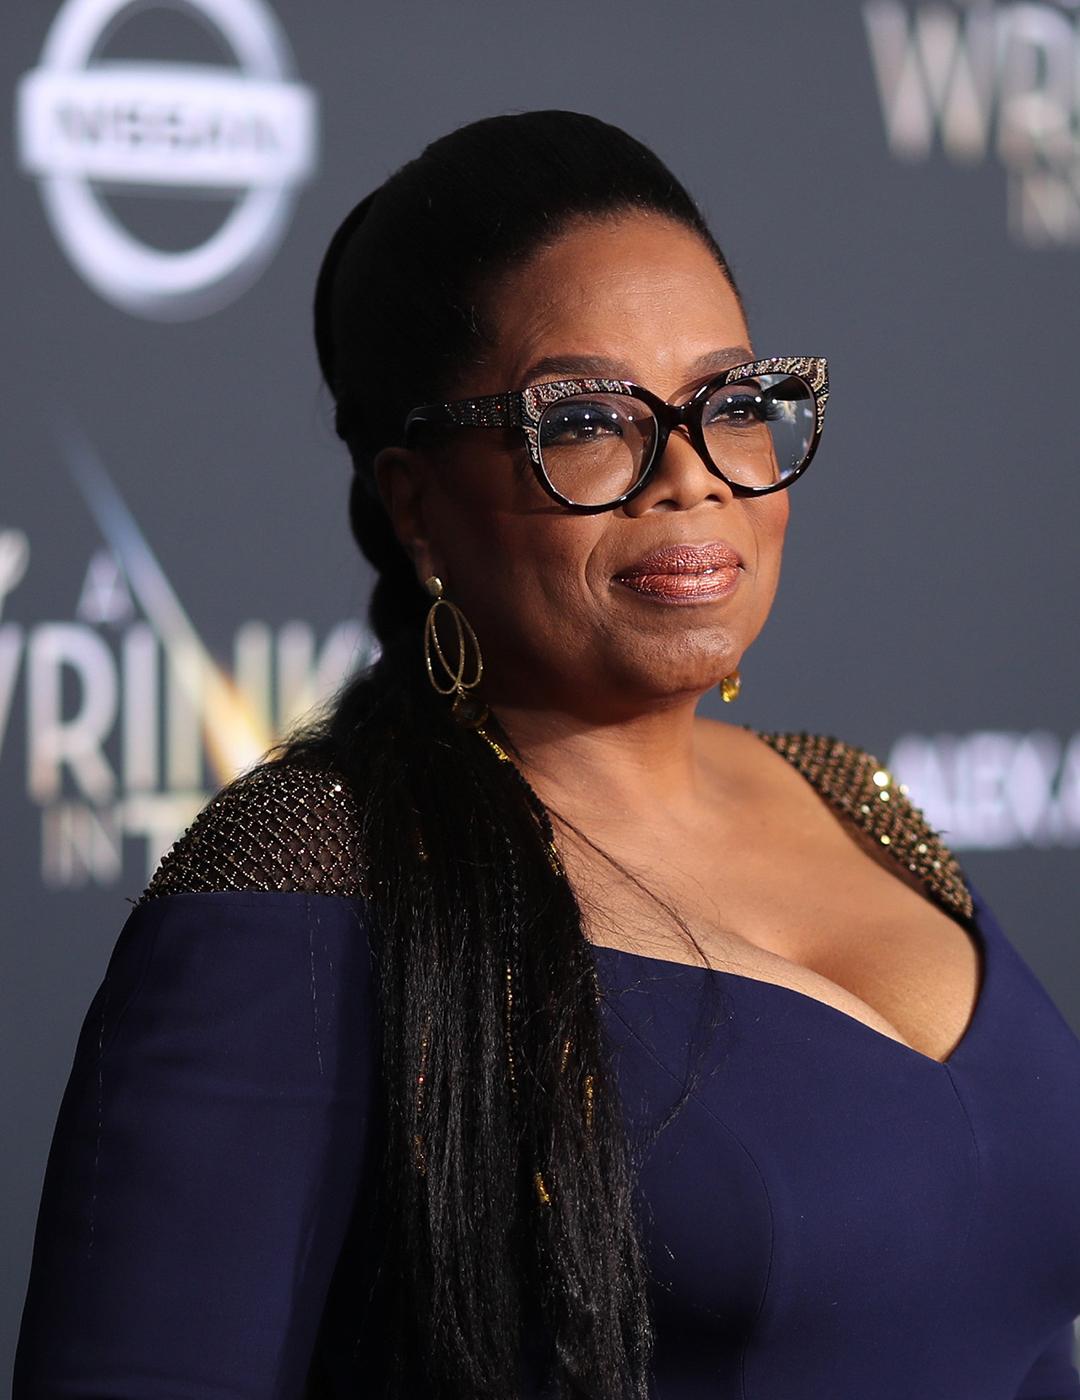 A photo of Oprah Winfrey wearing a royal blue long-sleeved dress, black cats eye glasses with her slicked-back low ponytail 